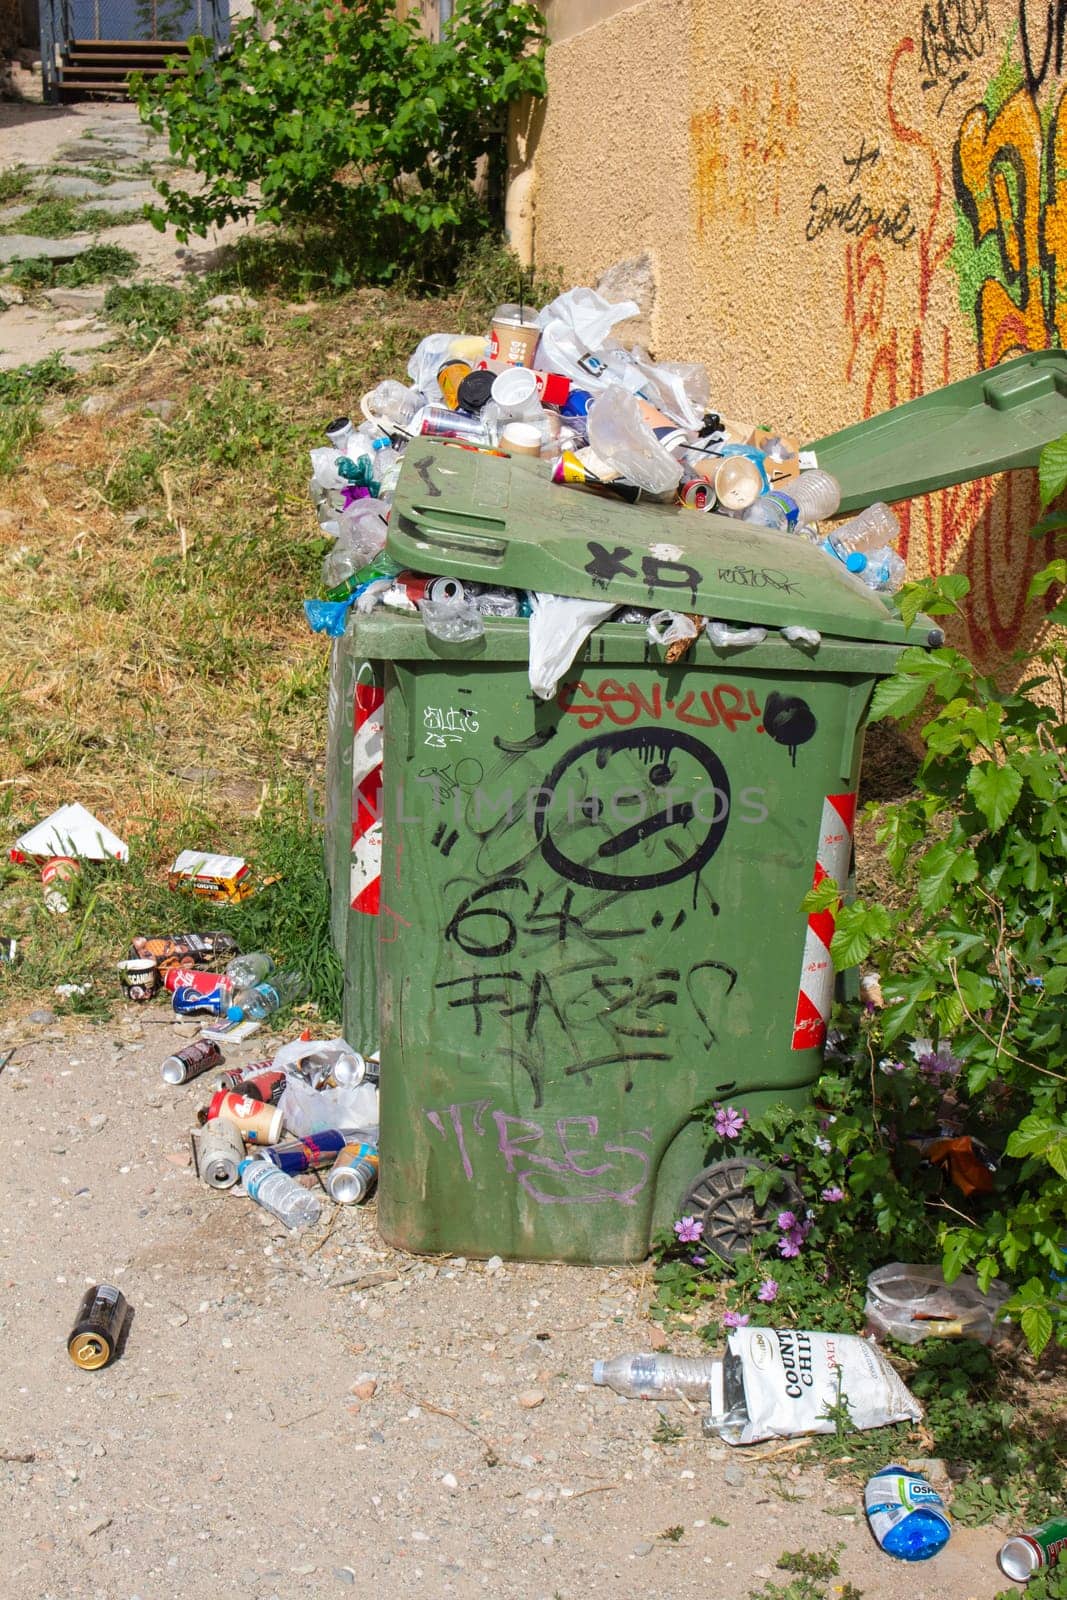 An overflowing trash bin presents a visible challenge in urban waste management, highlighting the need for increased collection and disposal efforts to maintain cleanliness in city streets